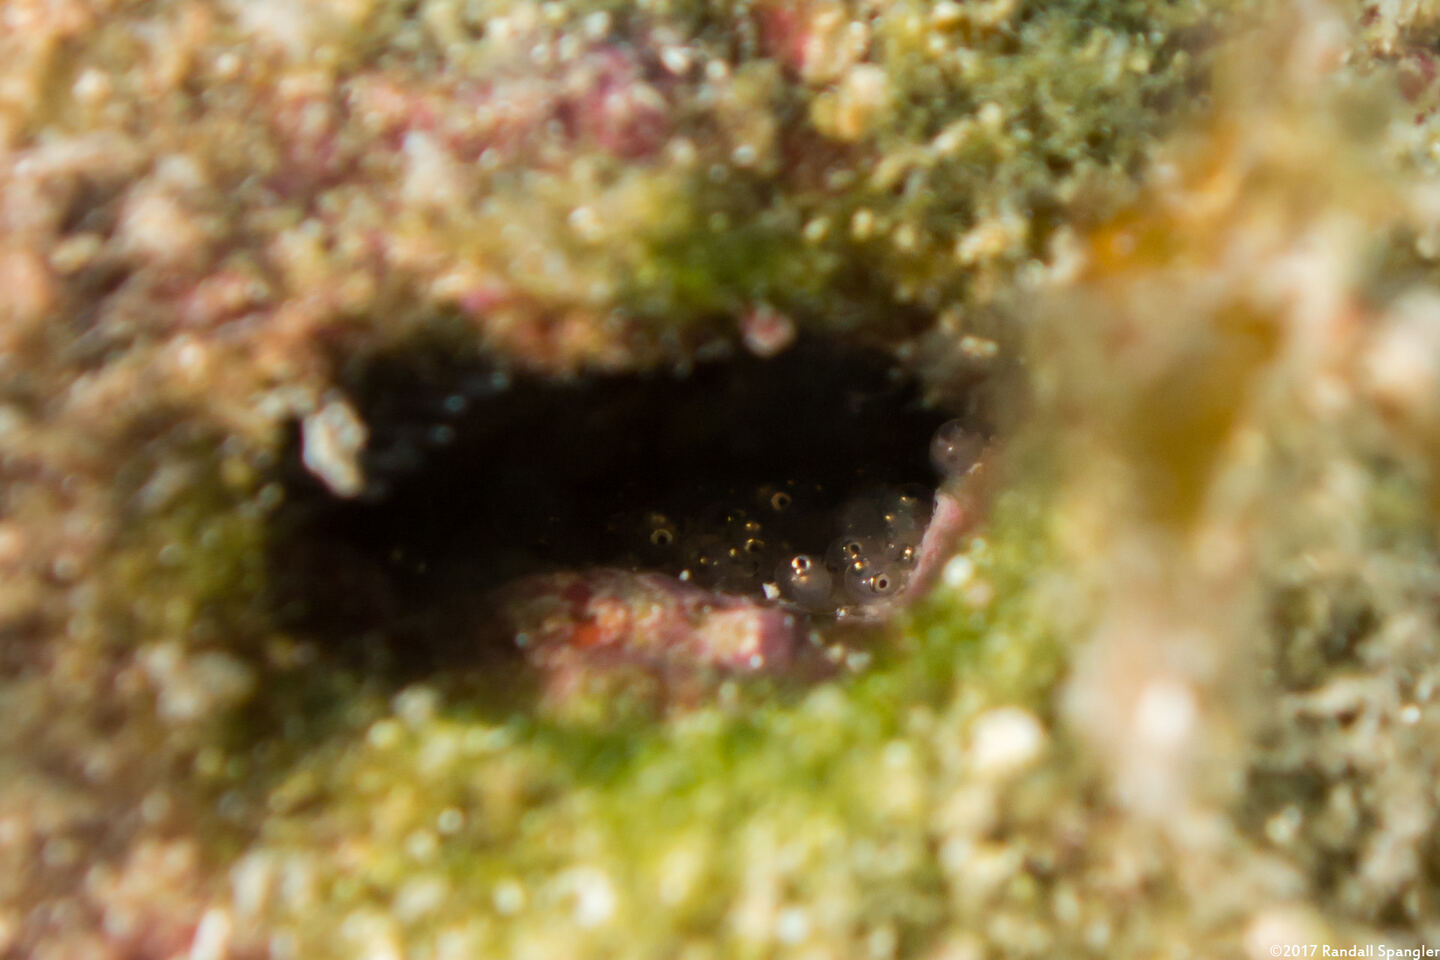 Emblemaria pandionis (Sailfin Blenny); Eggs in the blenny's hole